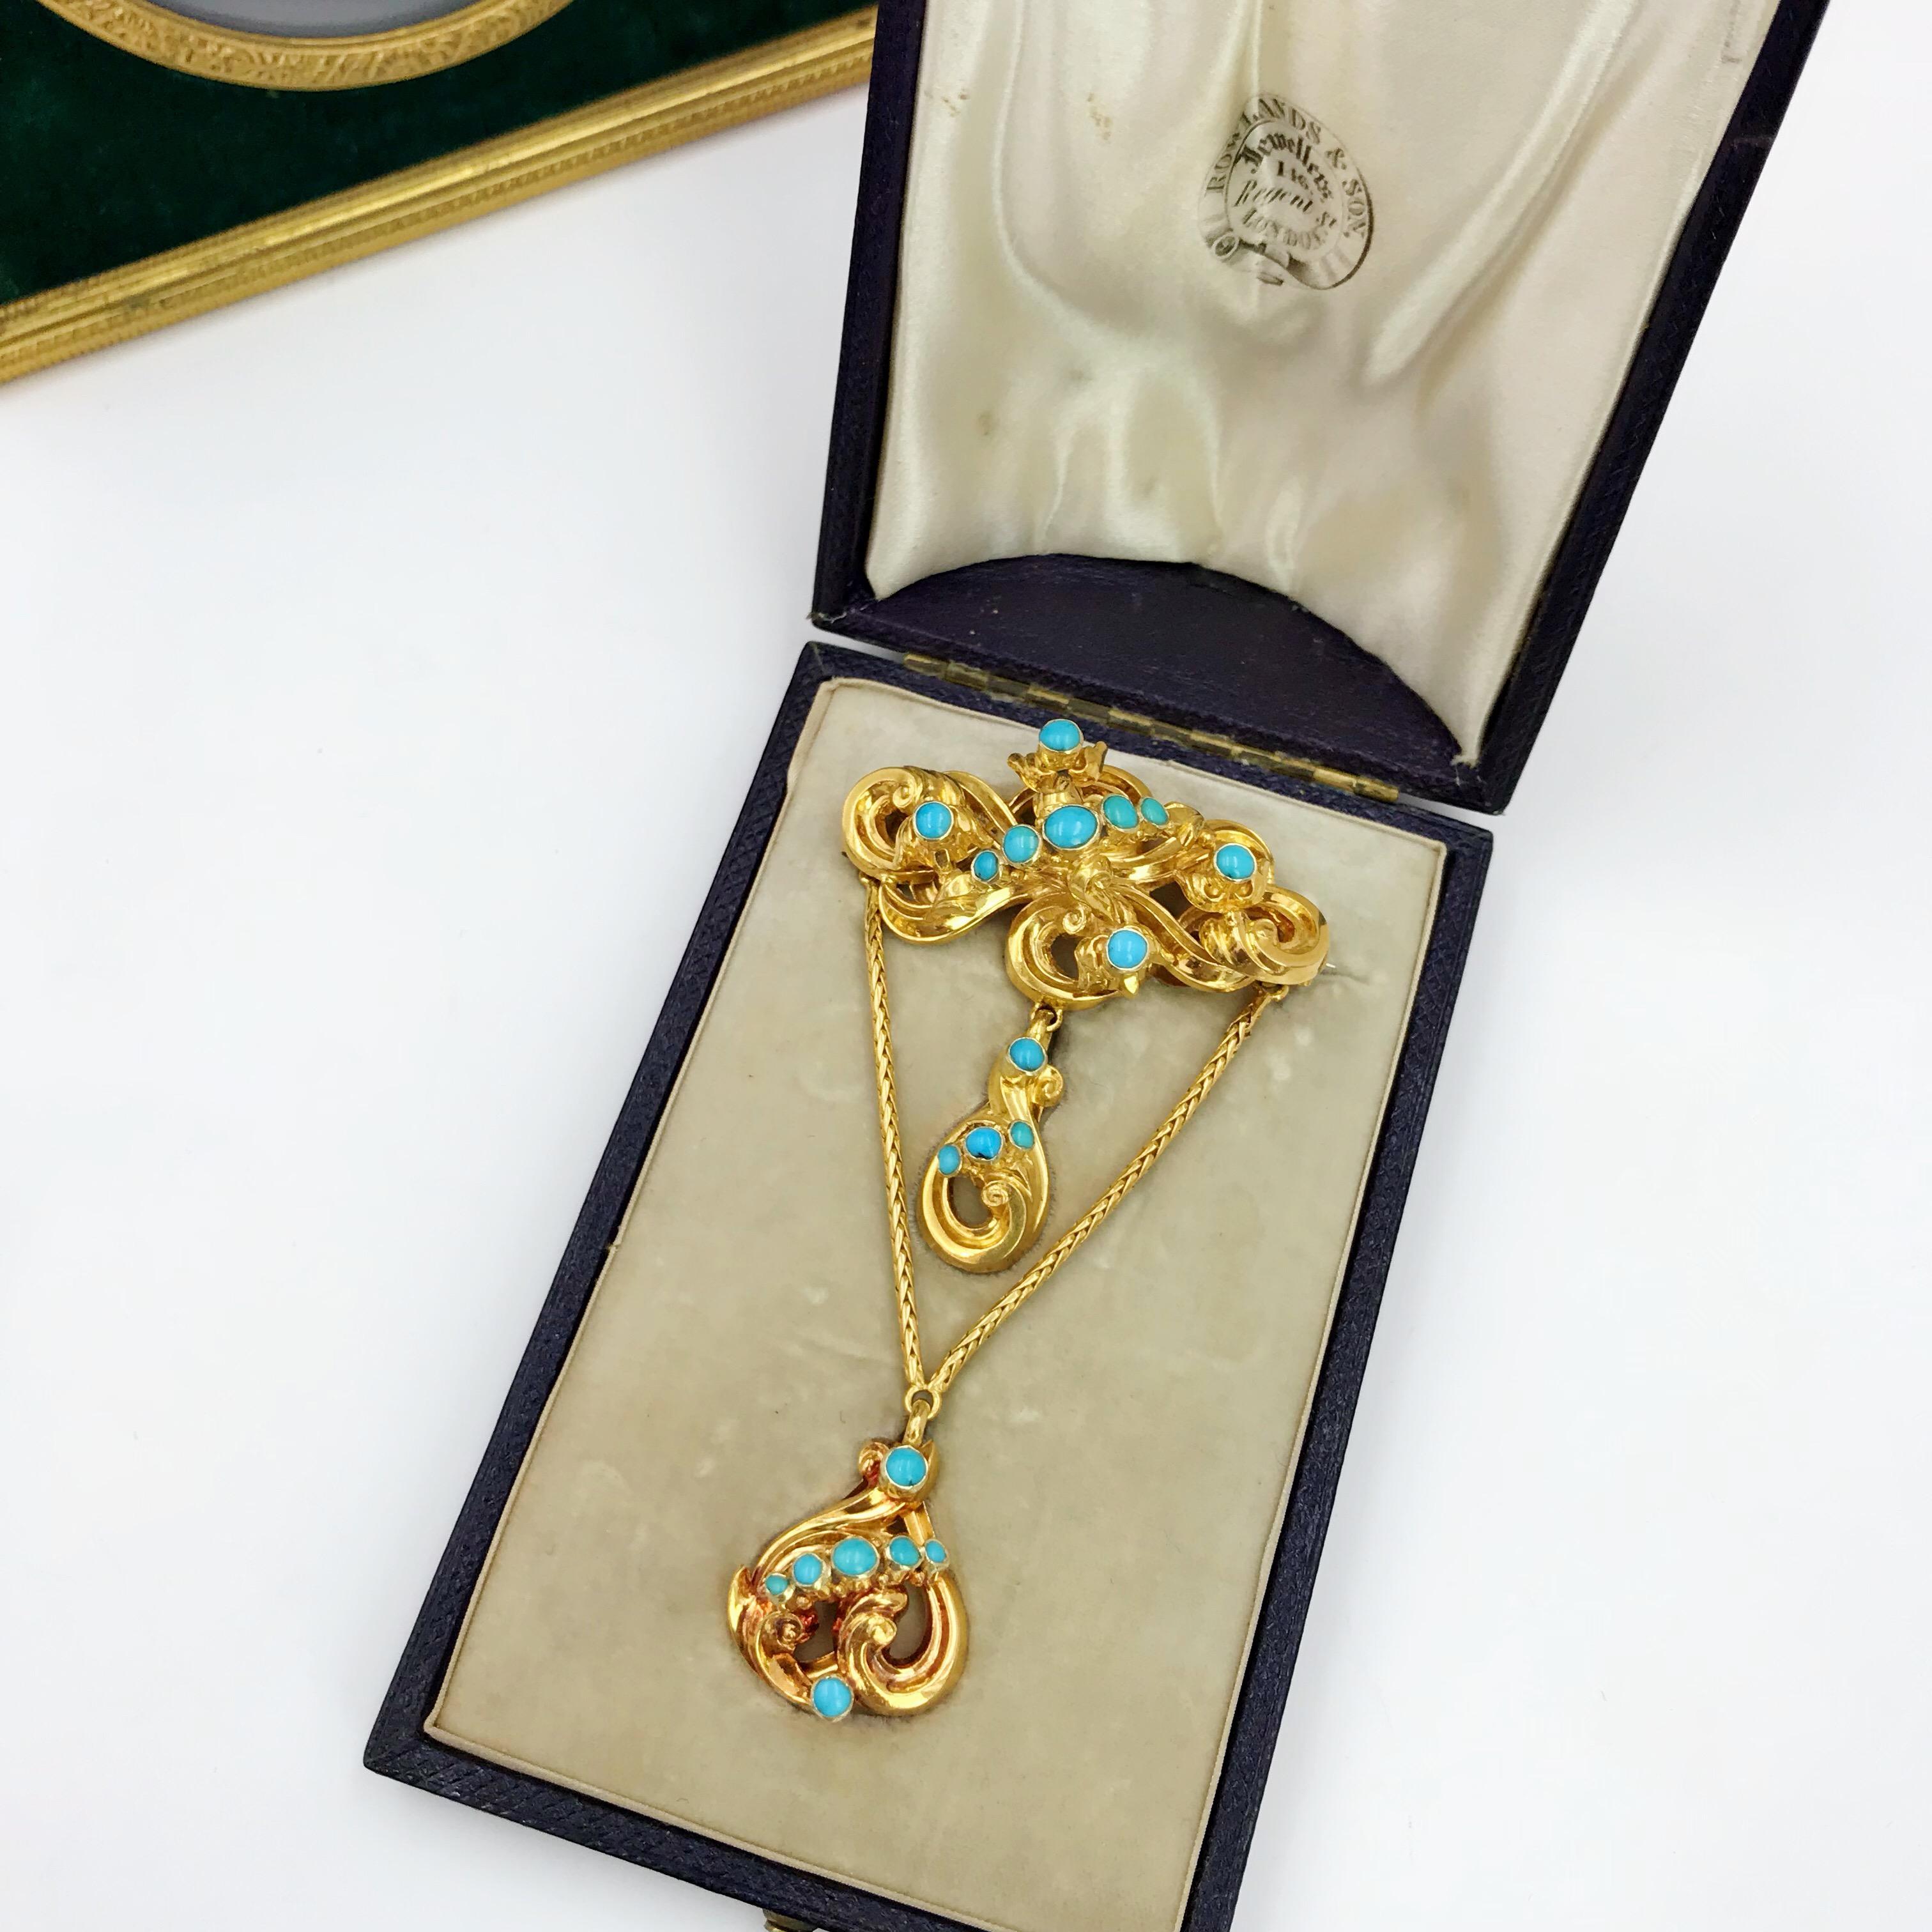 An early Victorian gold turquoise sentimental brooch. Comprising a grooved scroll, with turquoise cabochon floral highlights, suspending a similarly-designed drop and further drop on snake-link swag. Length 8cms. Weight 11gms. With fitted case.